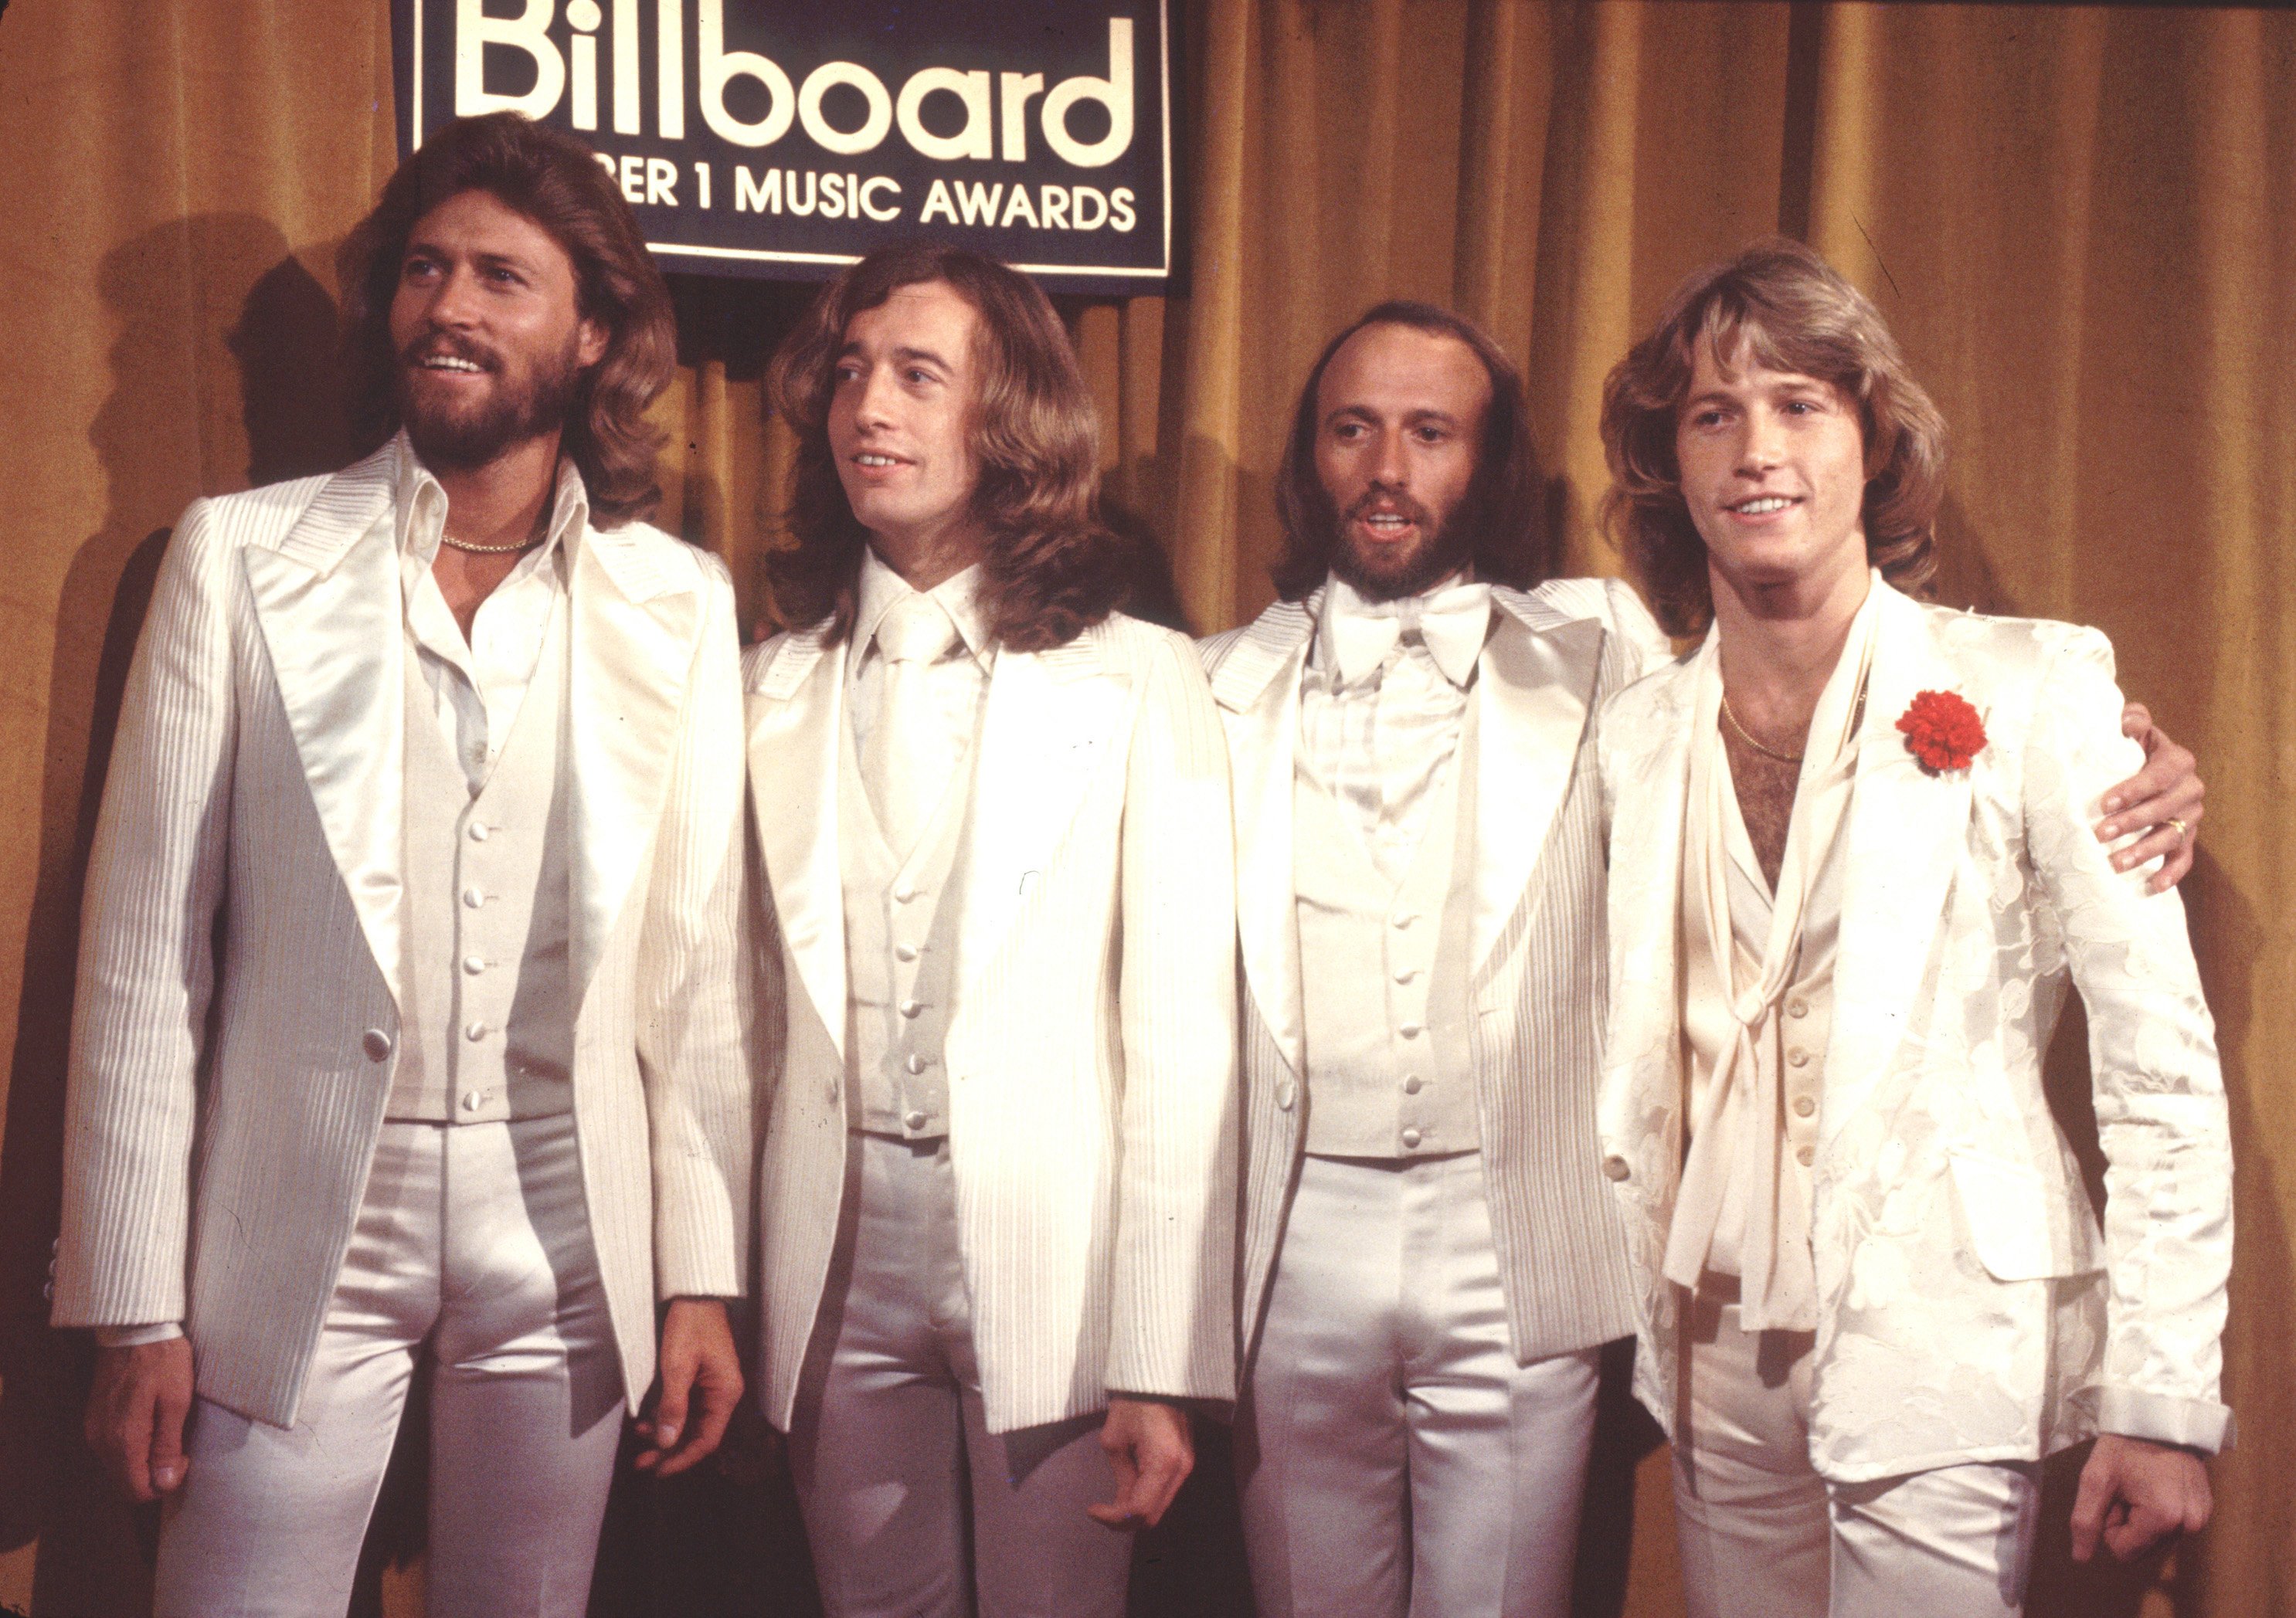 The Bee Gees Last Surviving Star Barry Gibb Considers Himself Lucky To Have His Wife Linda